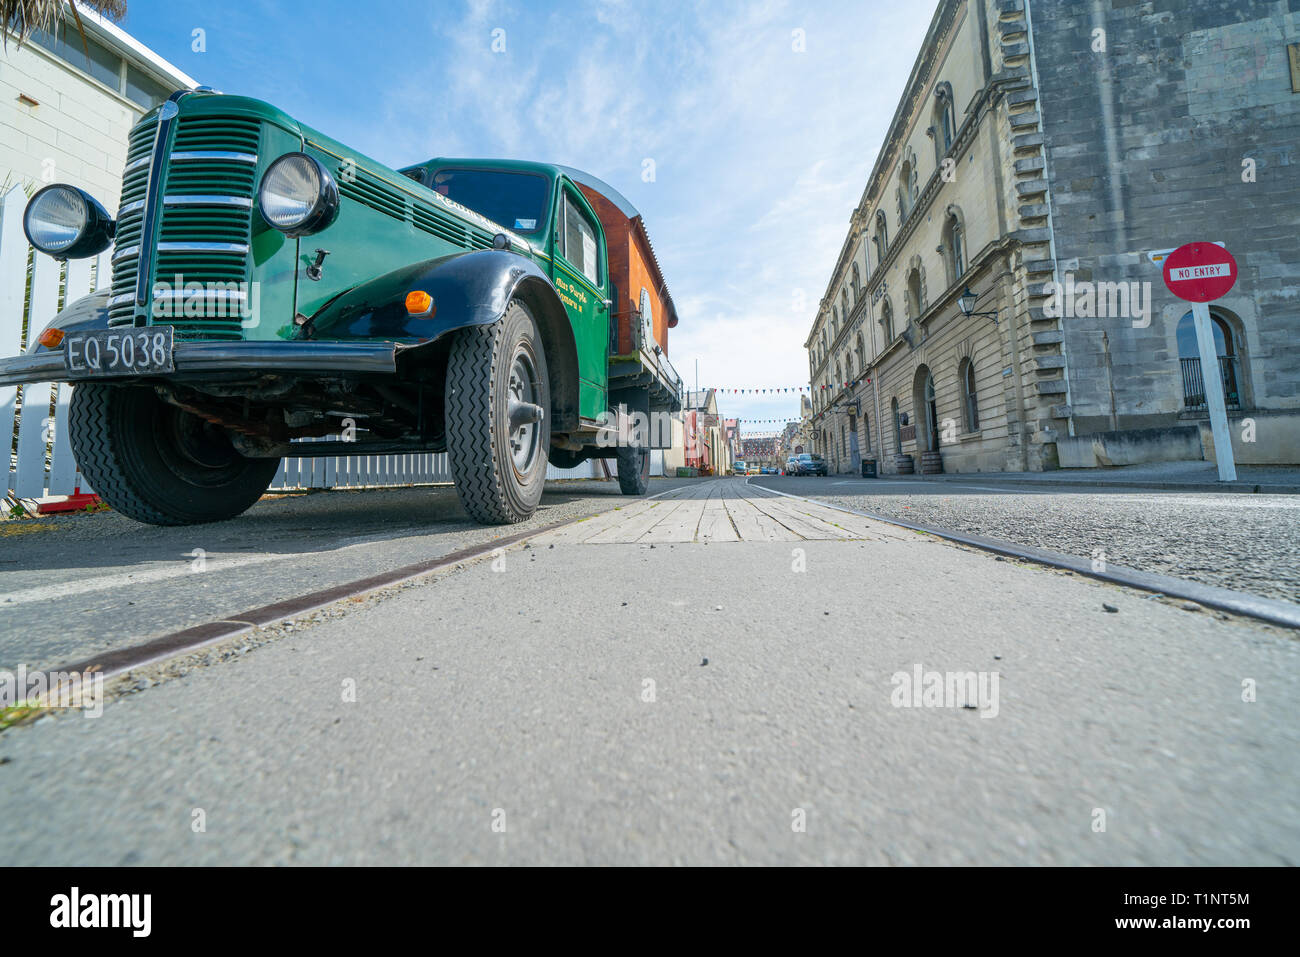 OAMARU NEW ZEALAND - OCTOBER 24 2018; Vintage green Bedford truck Miss Purple or Realm Runner converted to house-truck paked on side of intersetction  Stock Photo